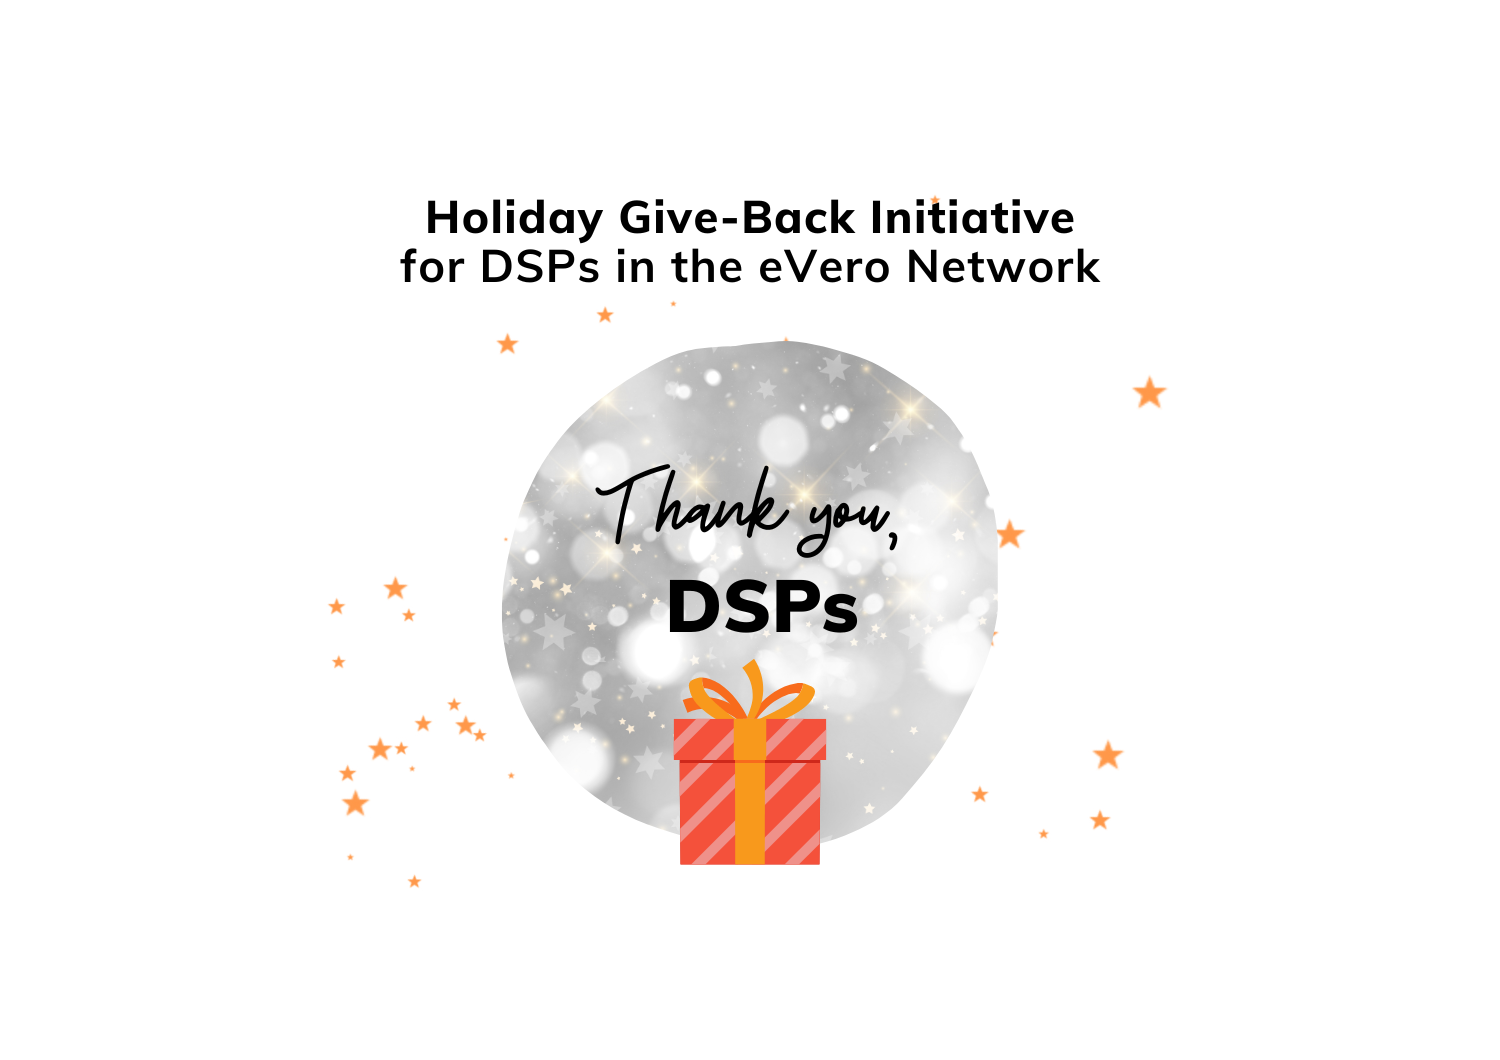 Holiday give-back for Direct Support Professionals